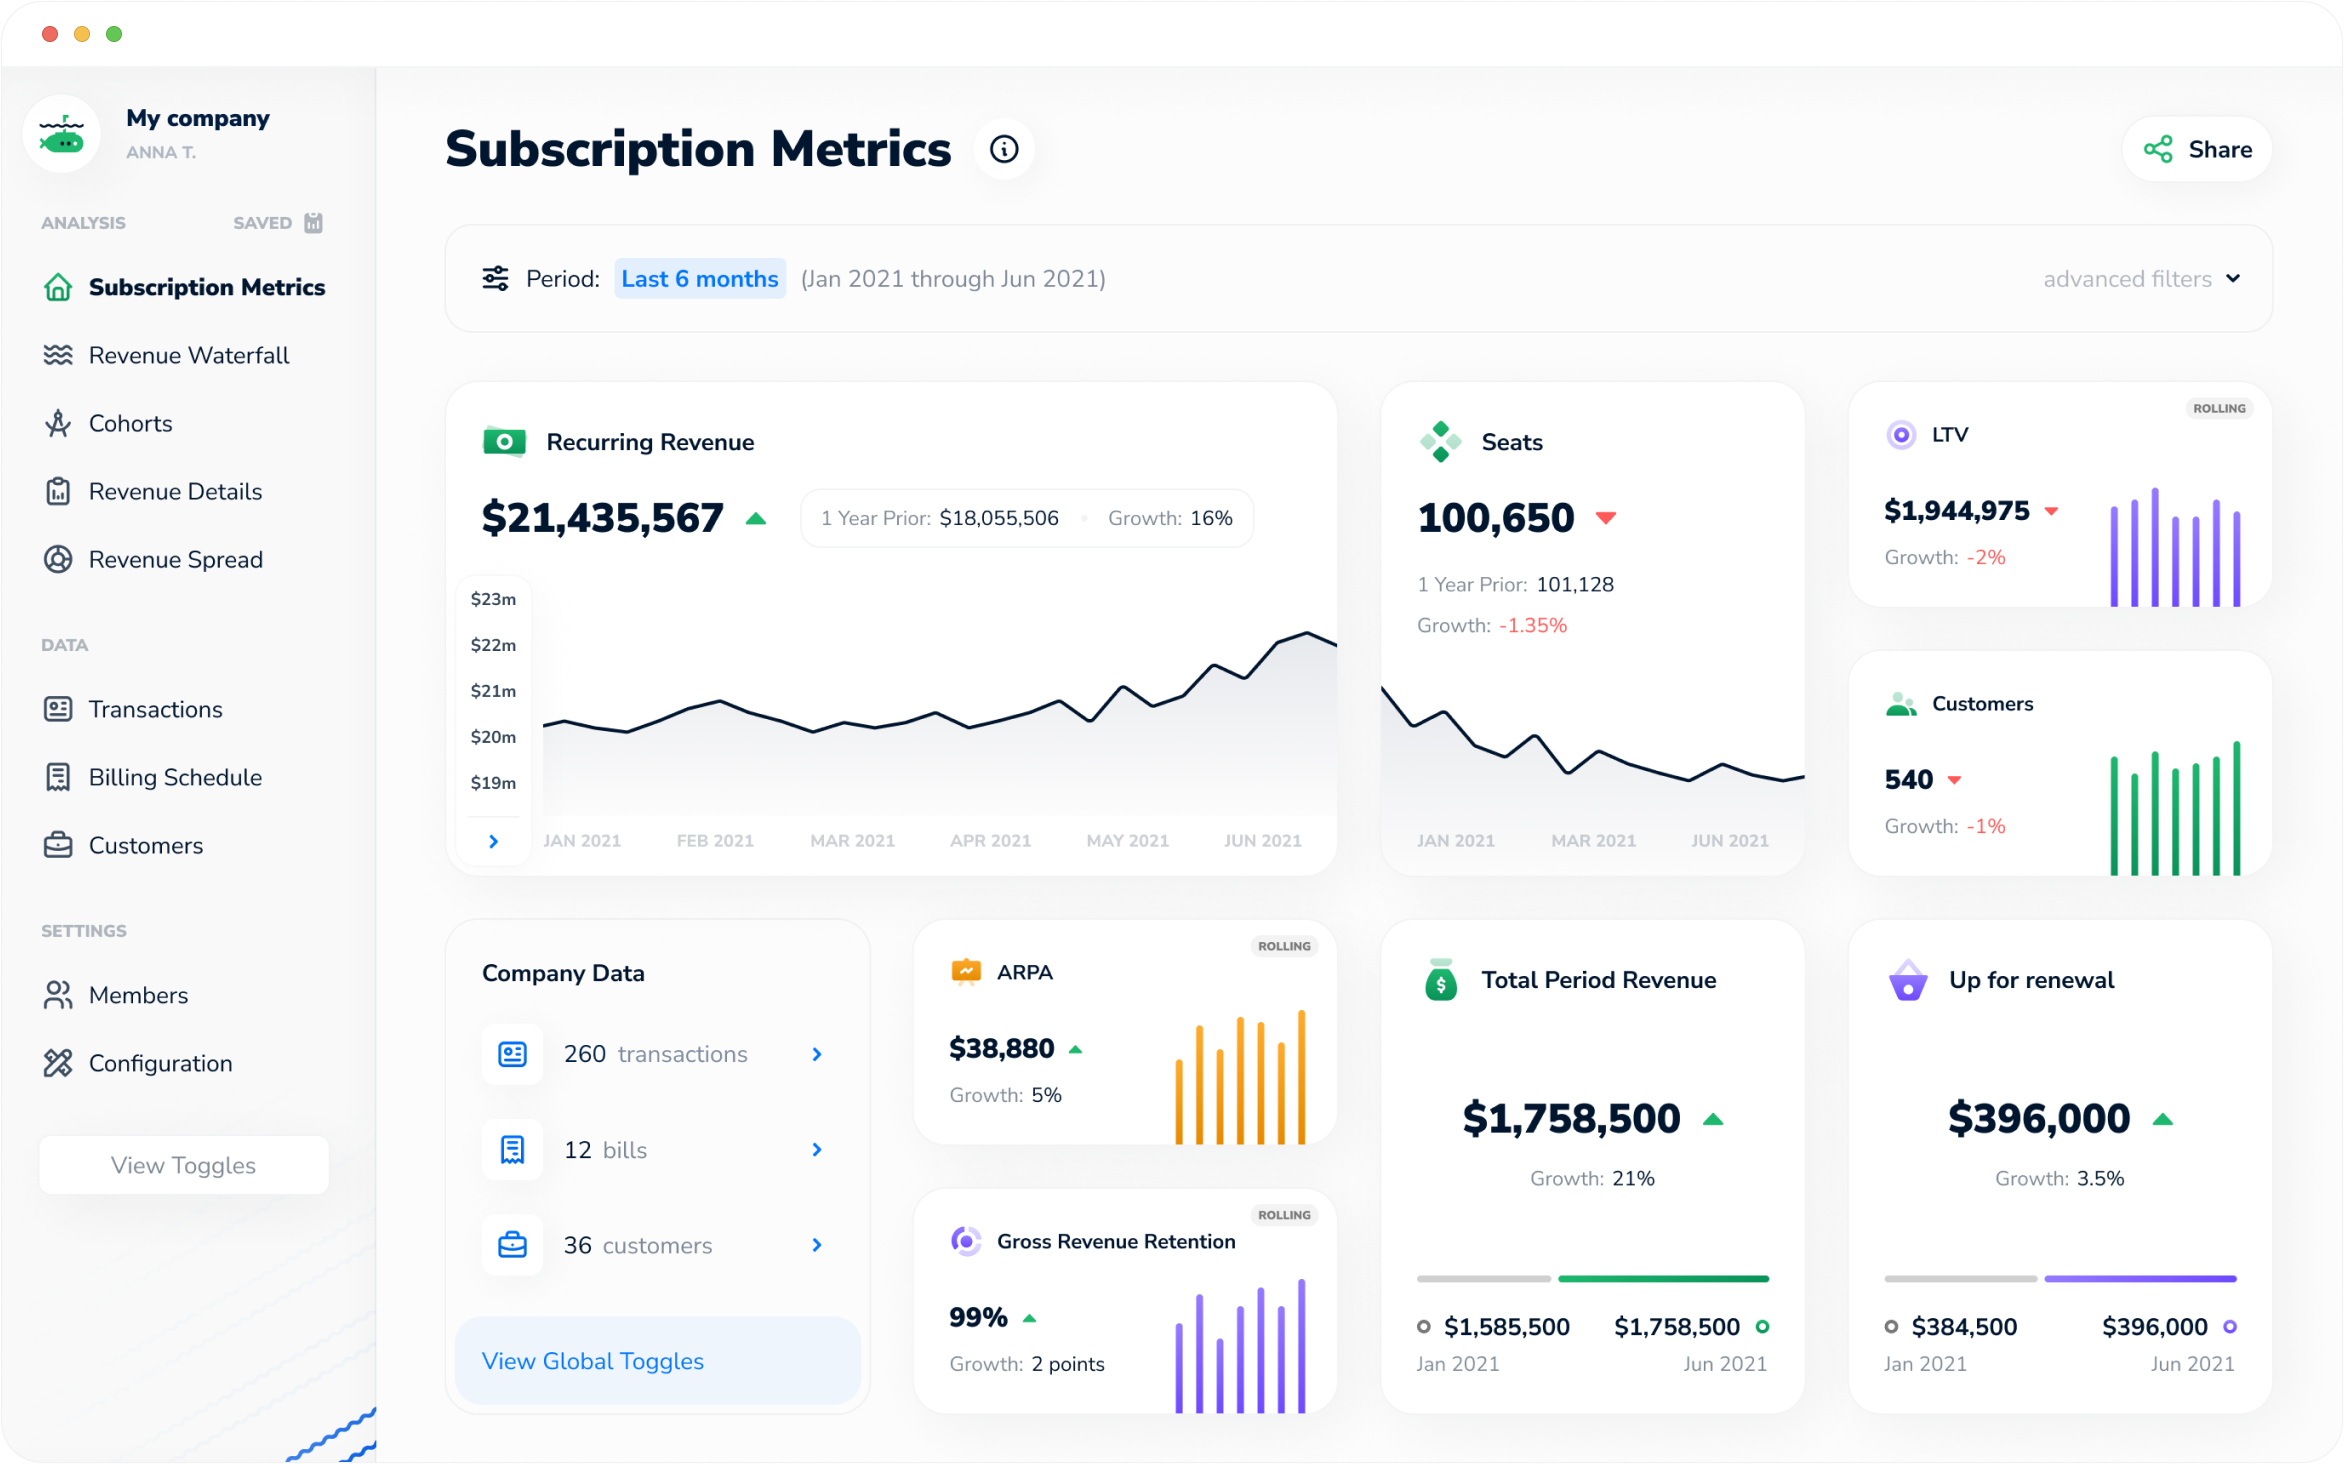 Accurate SaaS metrics at your fingertips - Instant access to your ARR, LTV, CAC, NRR, GRR, and 54 other SaaS metrics. You can finally stop manually updating your team’s ARR spreadsheet and get hours back every week.